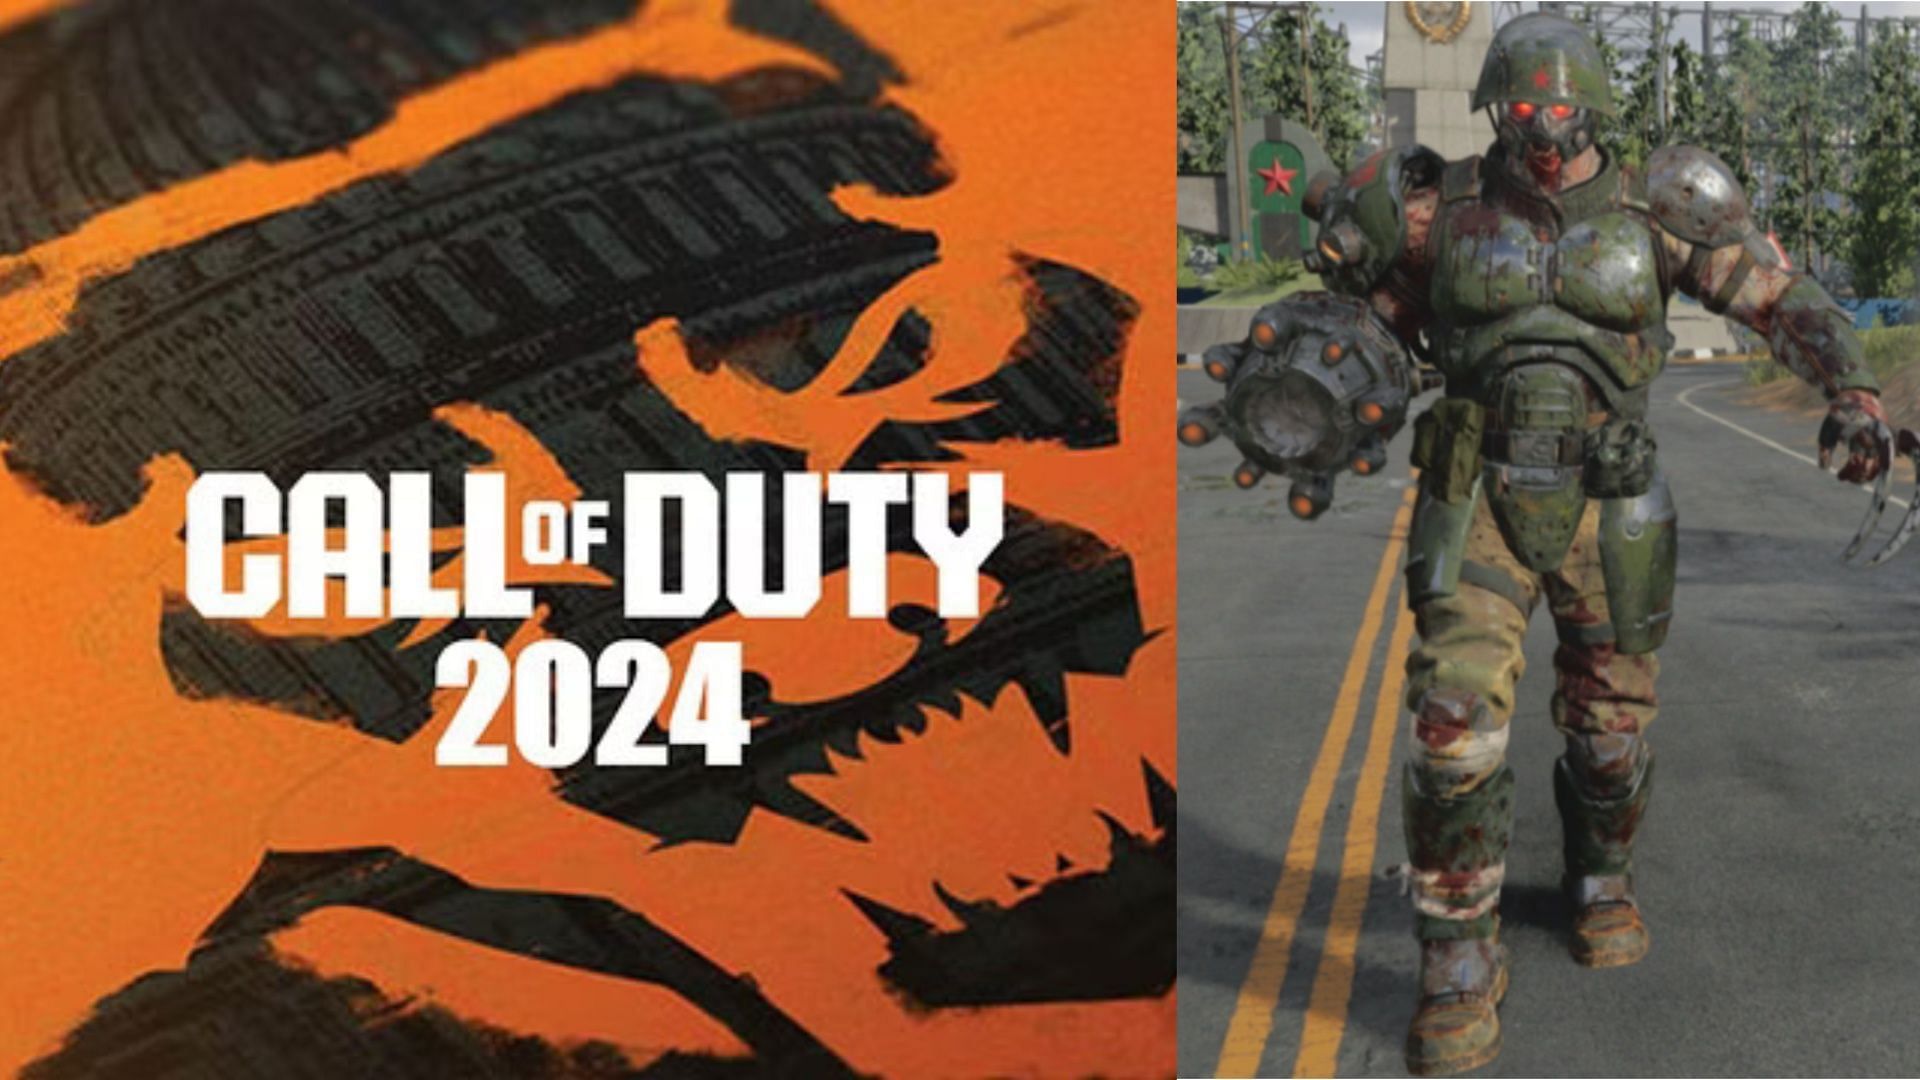 Mangler is rumored to return in CoD 2024 Black Ops 6 Zombies (Image via Activision)